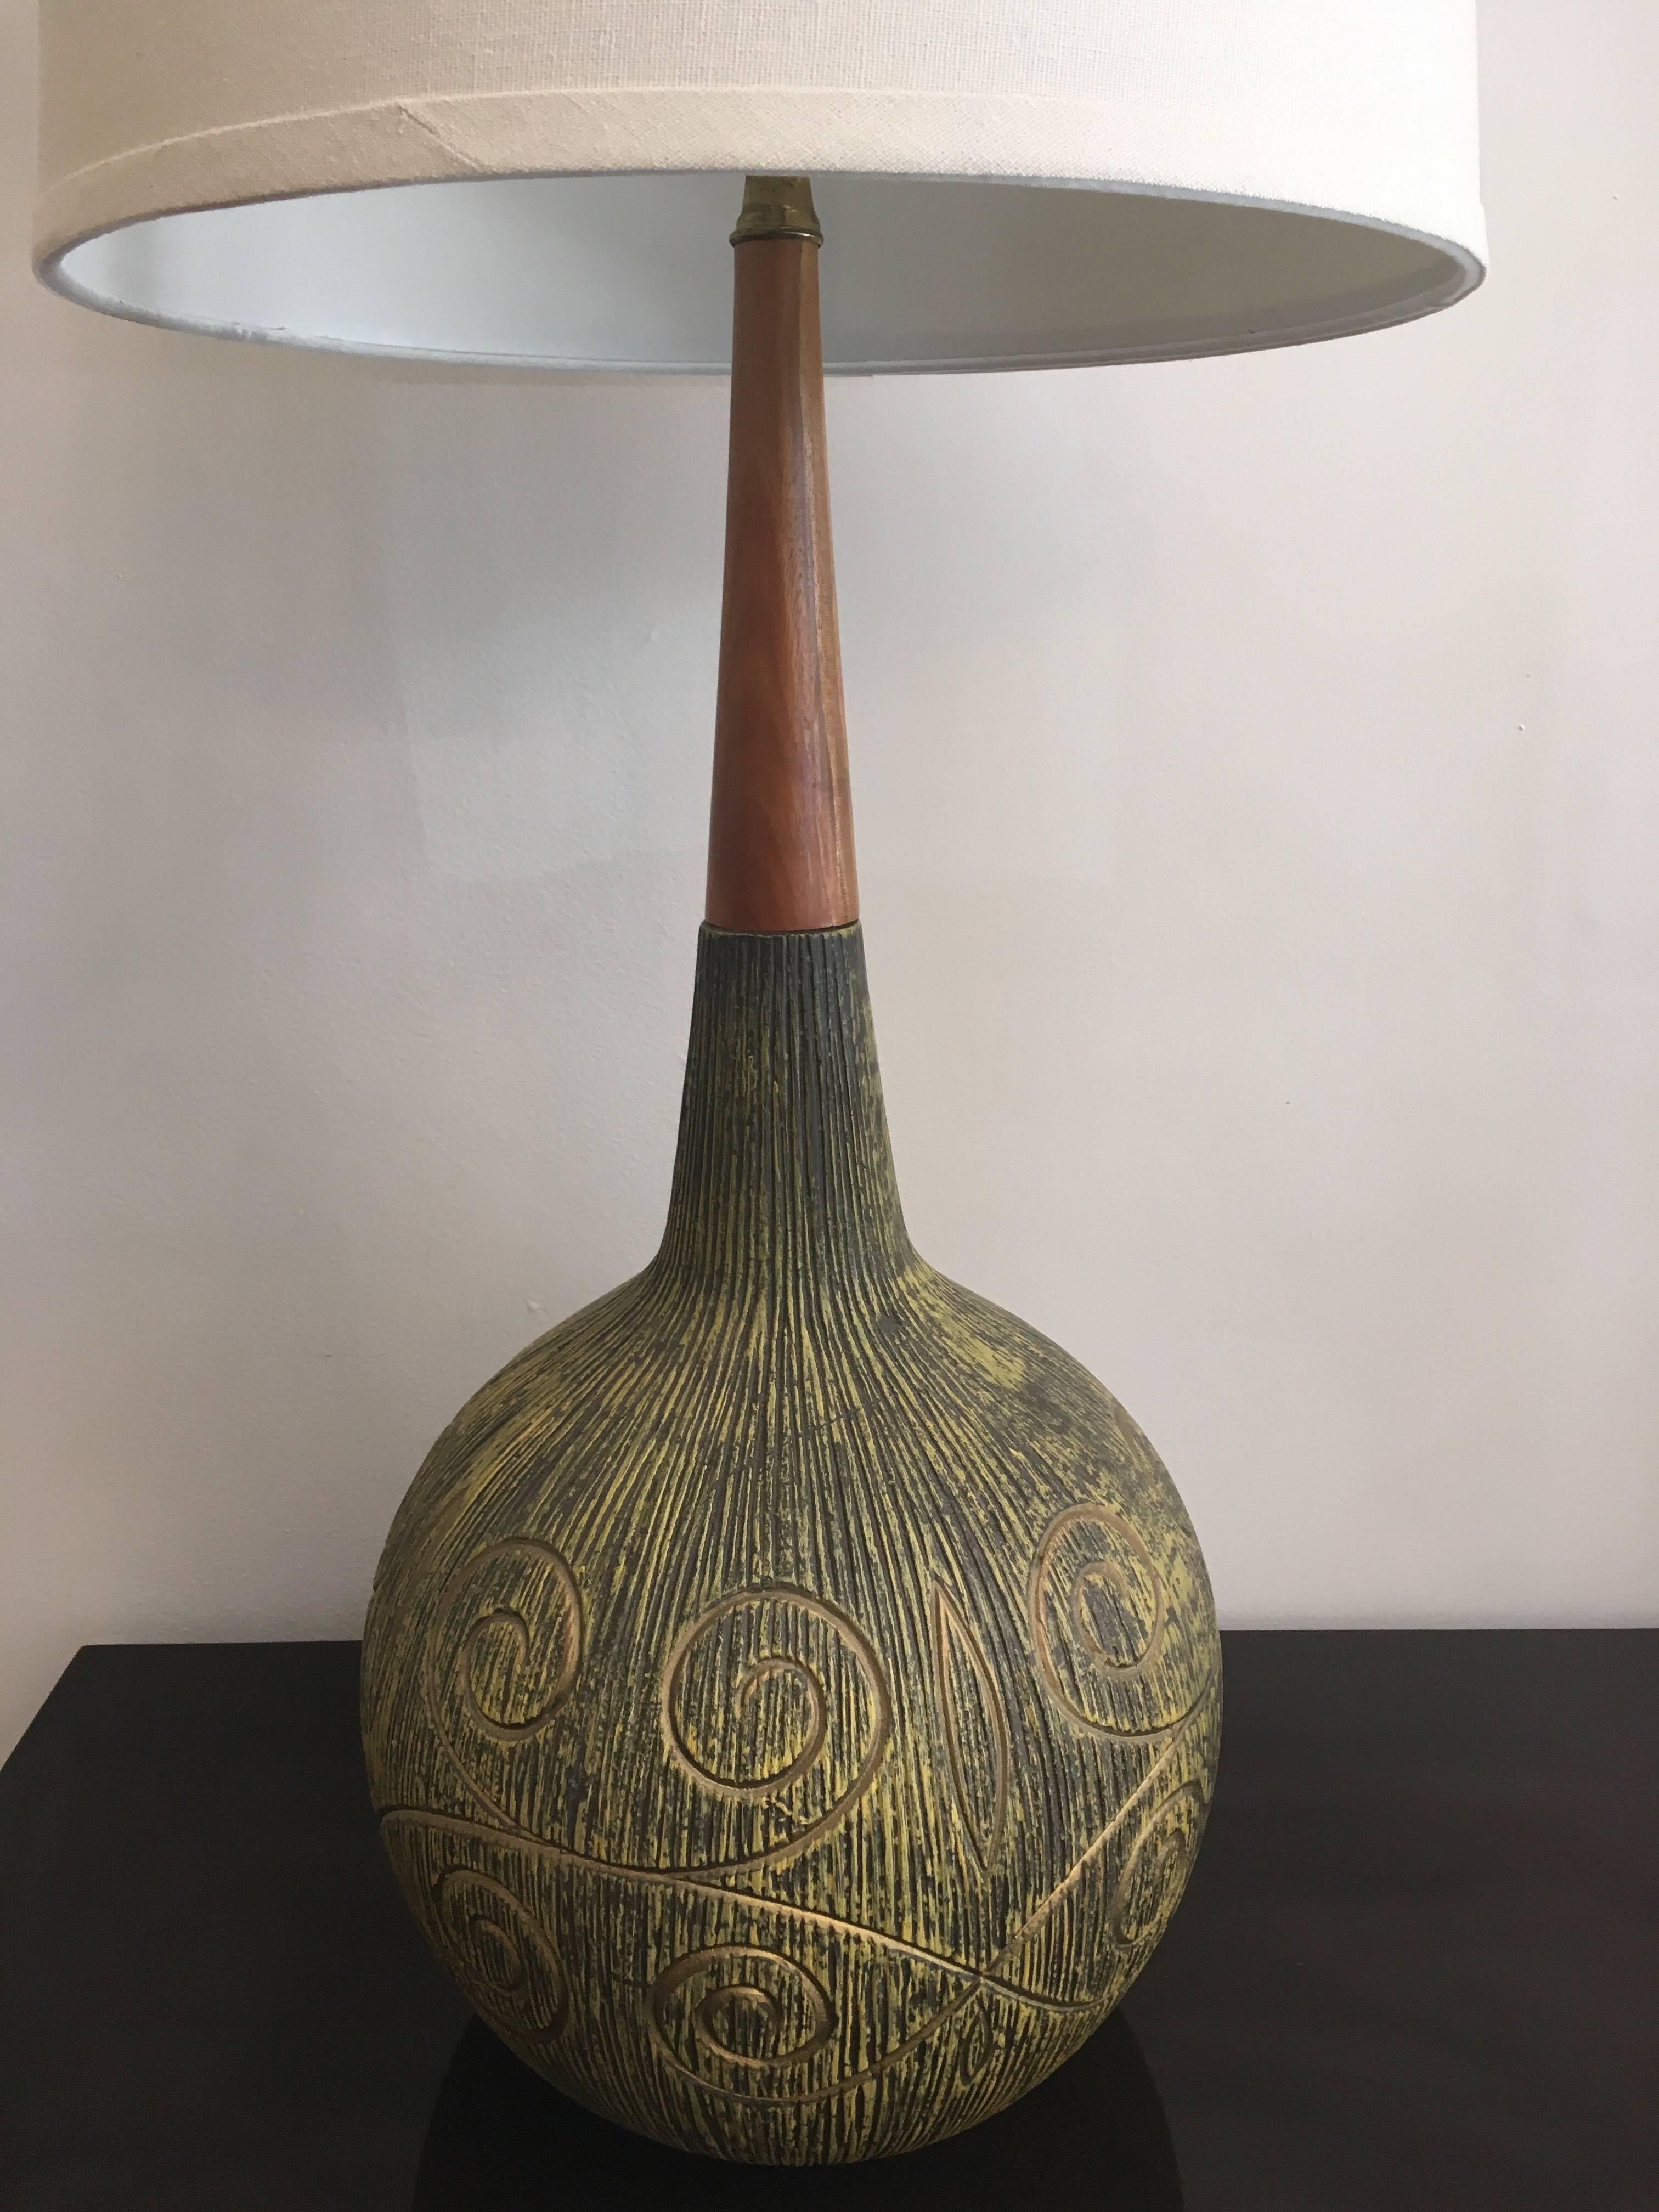 A pair of 1960s Italian art pottery table lamps with walnut necks and Sgraffito decorative design to the bodies. Newly rewired.